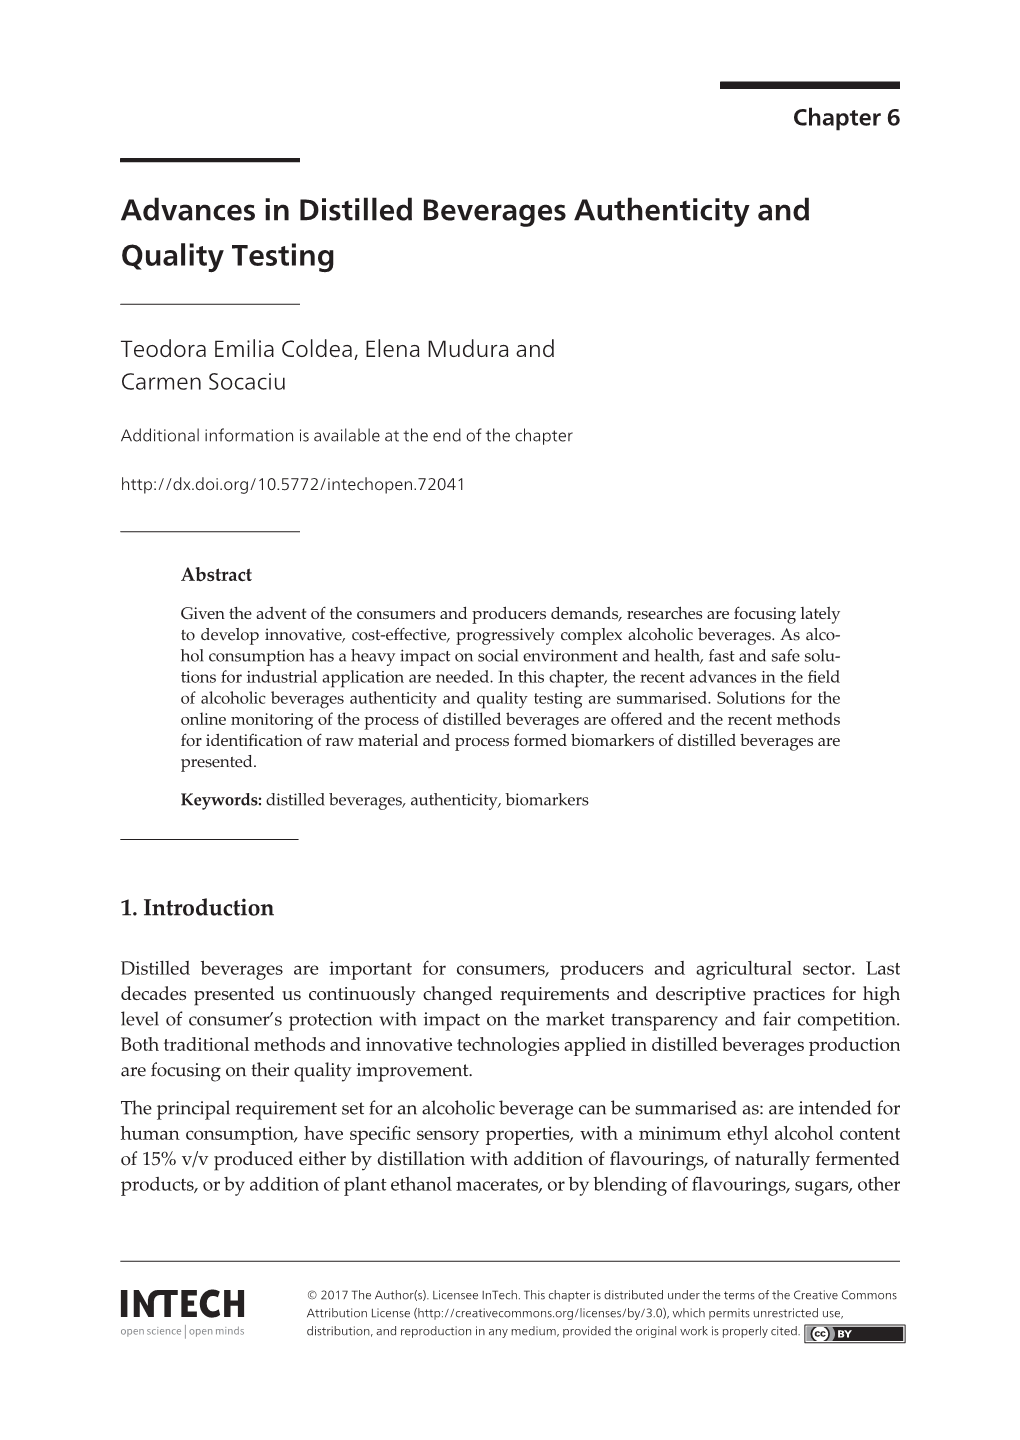 Advances in Distilled Beverages Authenticity and Quality Testingadvances in Distilled Beverages Authenticity and Quality Testing